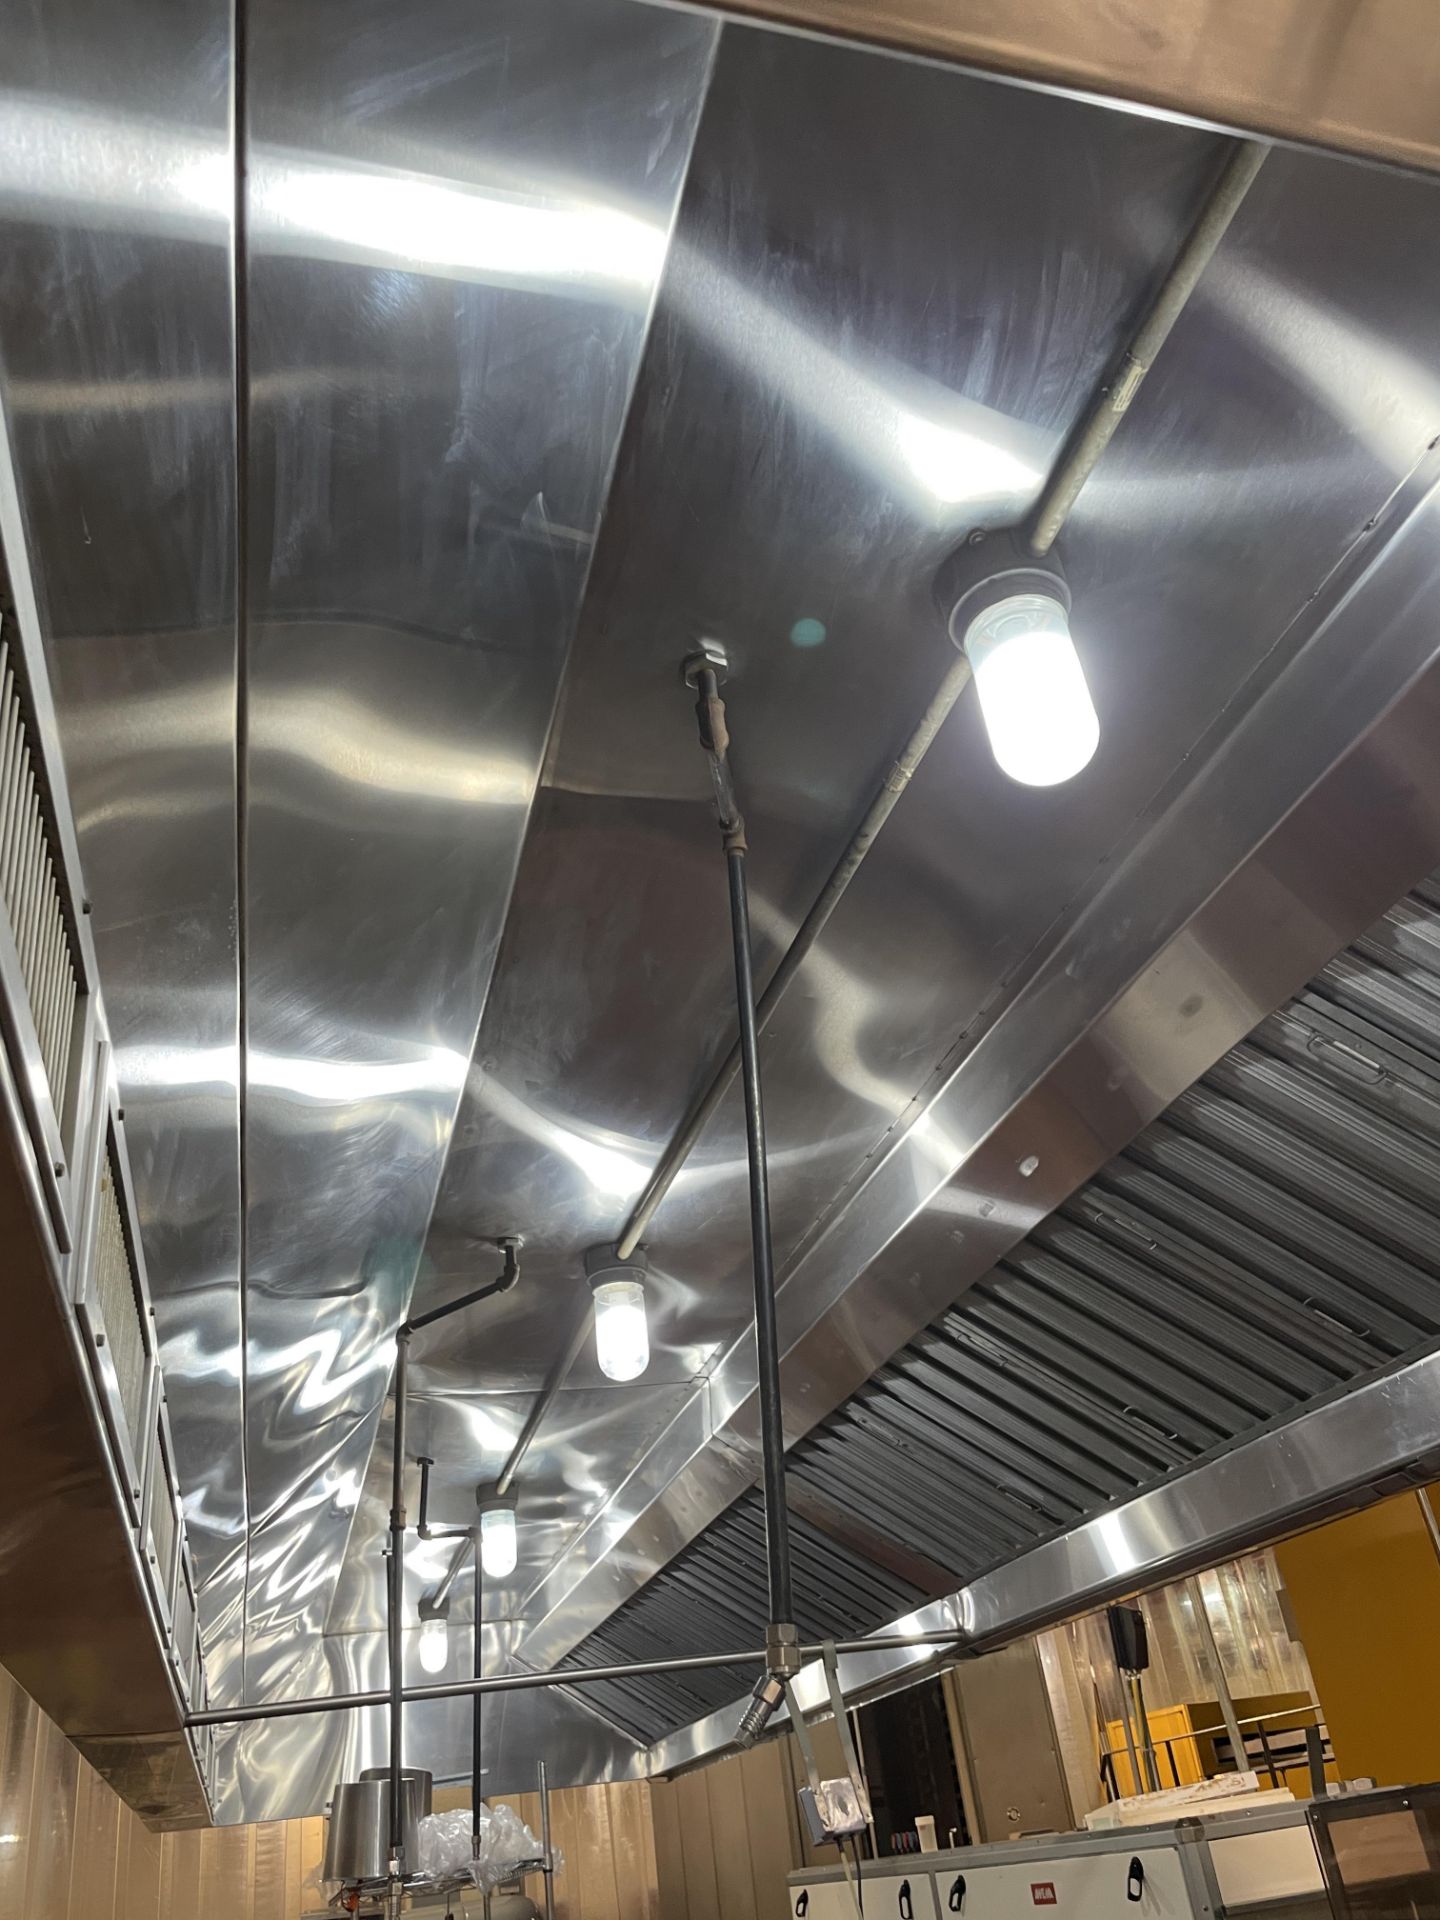 Vent hood stainless steel - 20ft long x 6ft deep - Image 3 of 5